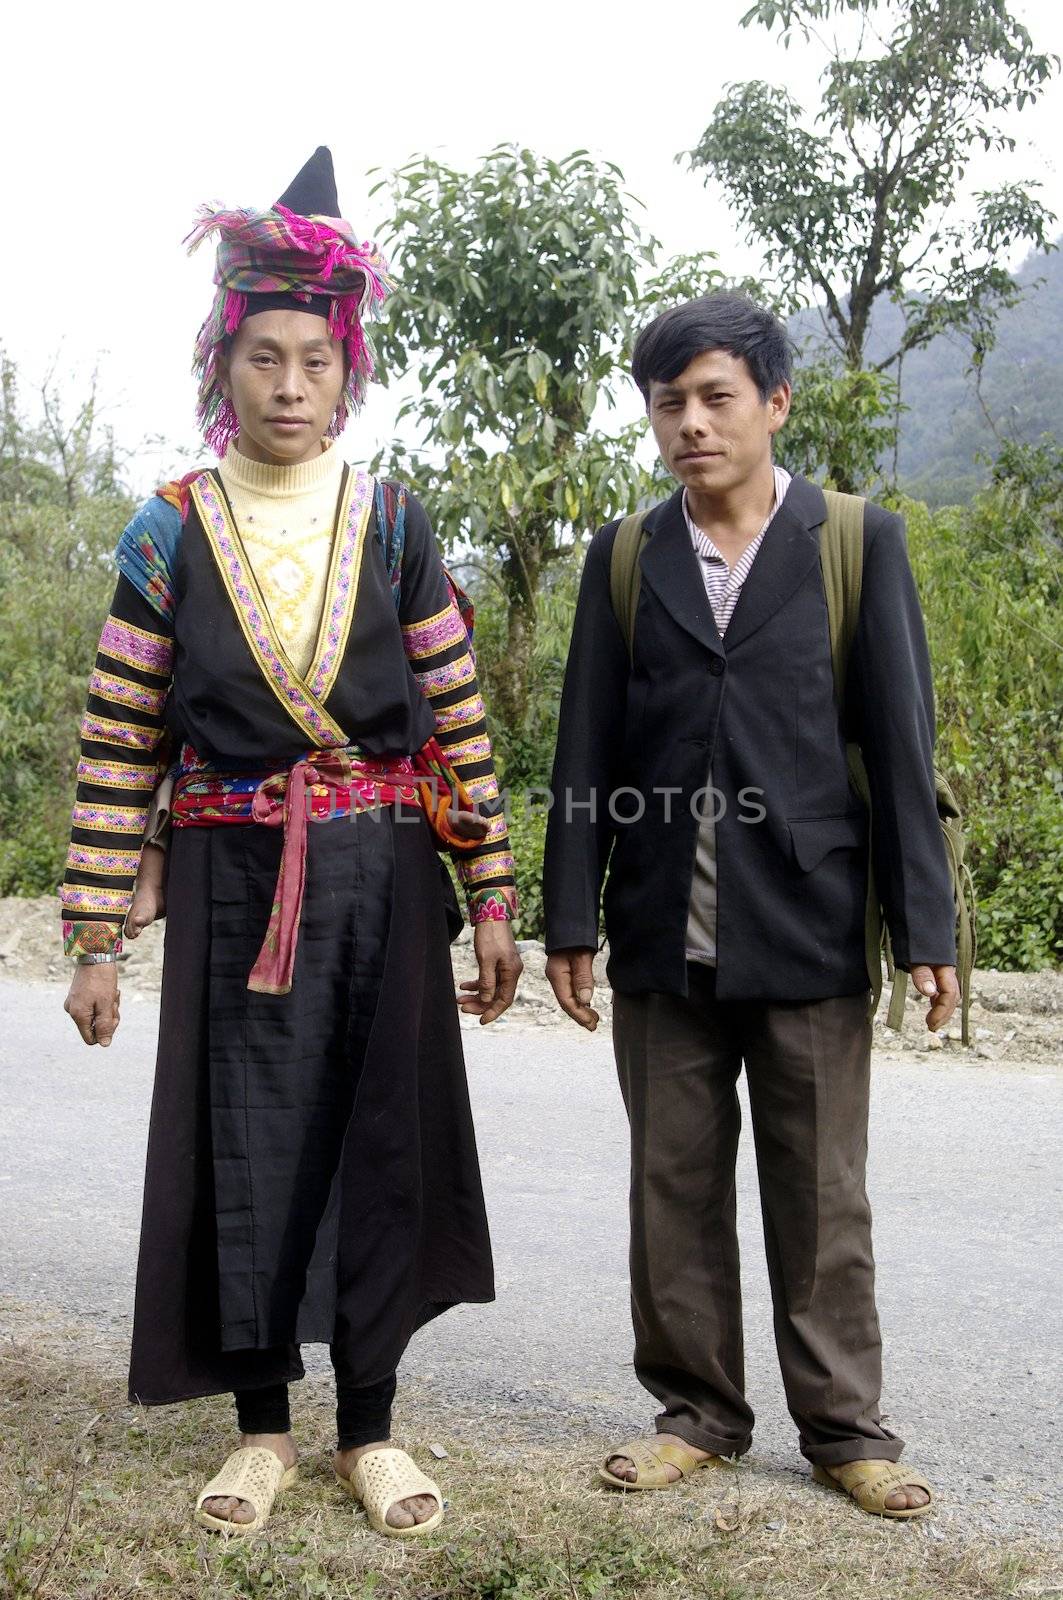 On the road a couple ethnic La Chi and their baby will travel 20 km walk to the wedding of a neighbor. They left at night to arrive before noon. If the woman has retained the traditional clothing, men often abandoned.